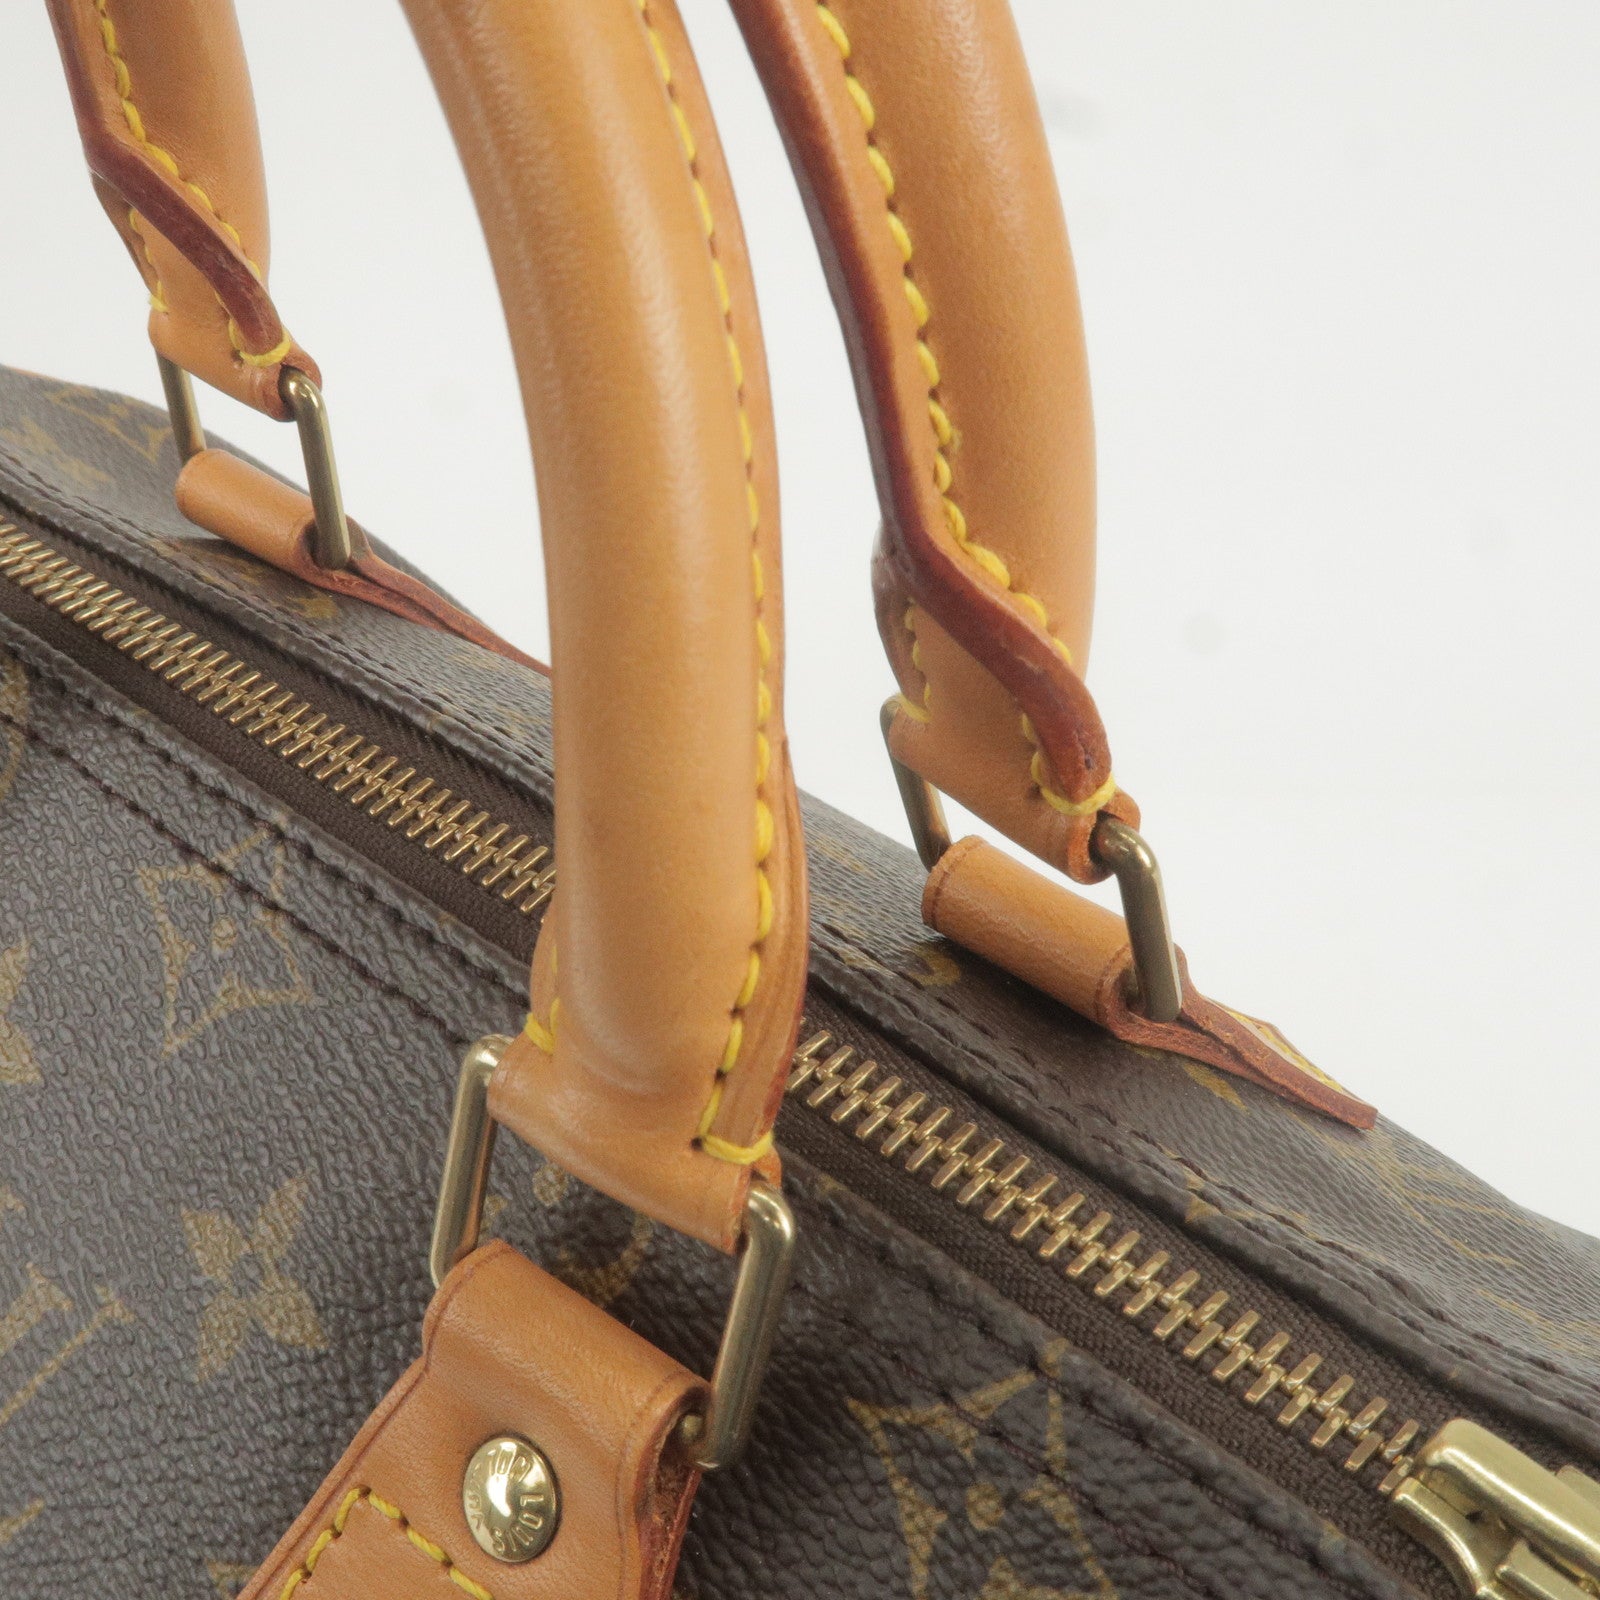 Louis Vuitton Virgil Prism Keepall. What I think about this bag